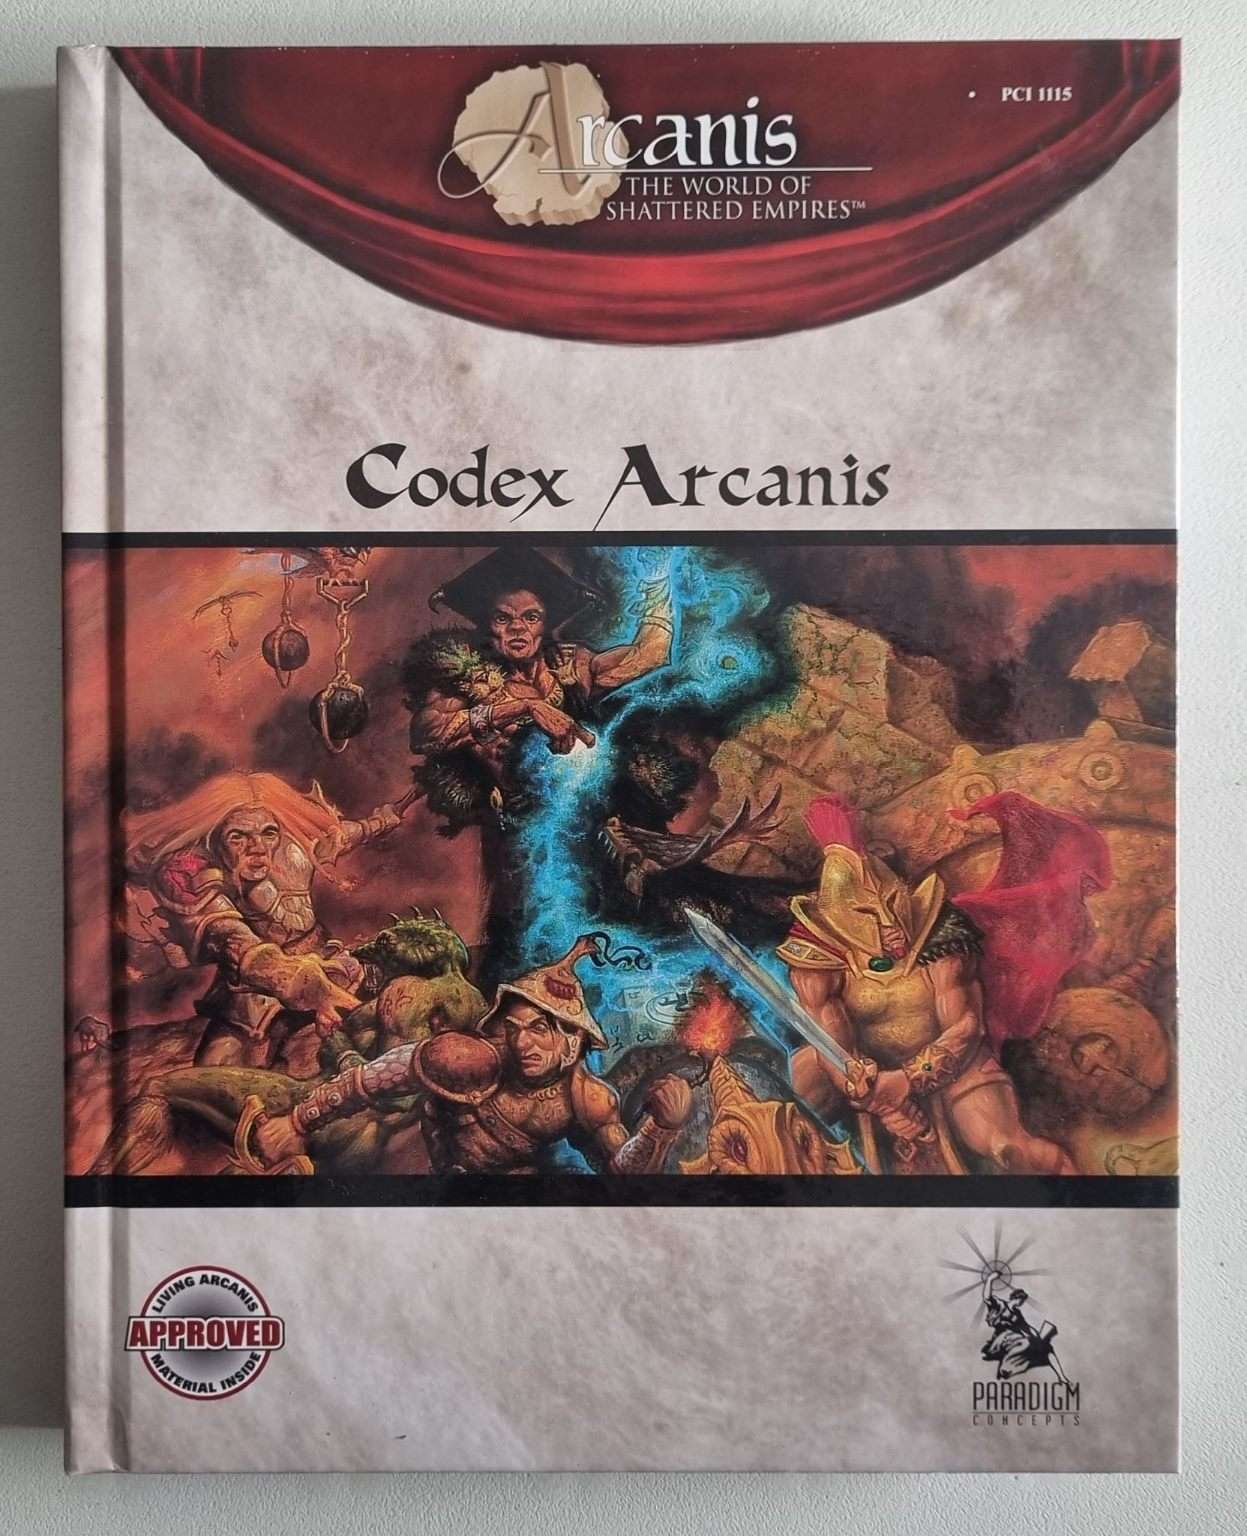 Arcanis The World of Shattered Empires - Codex Arcanis